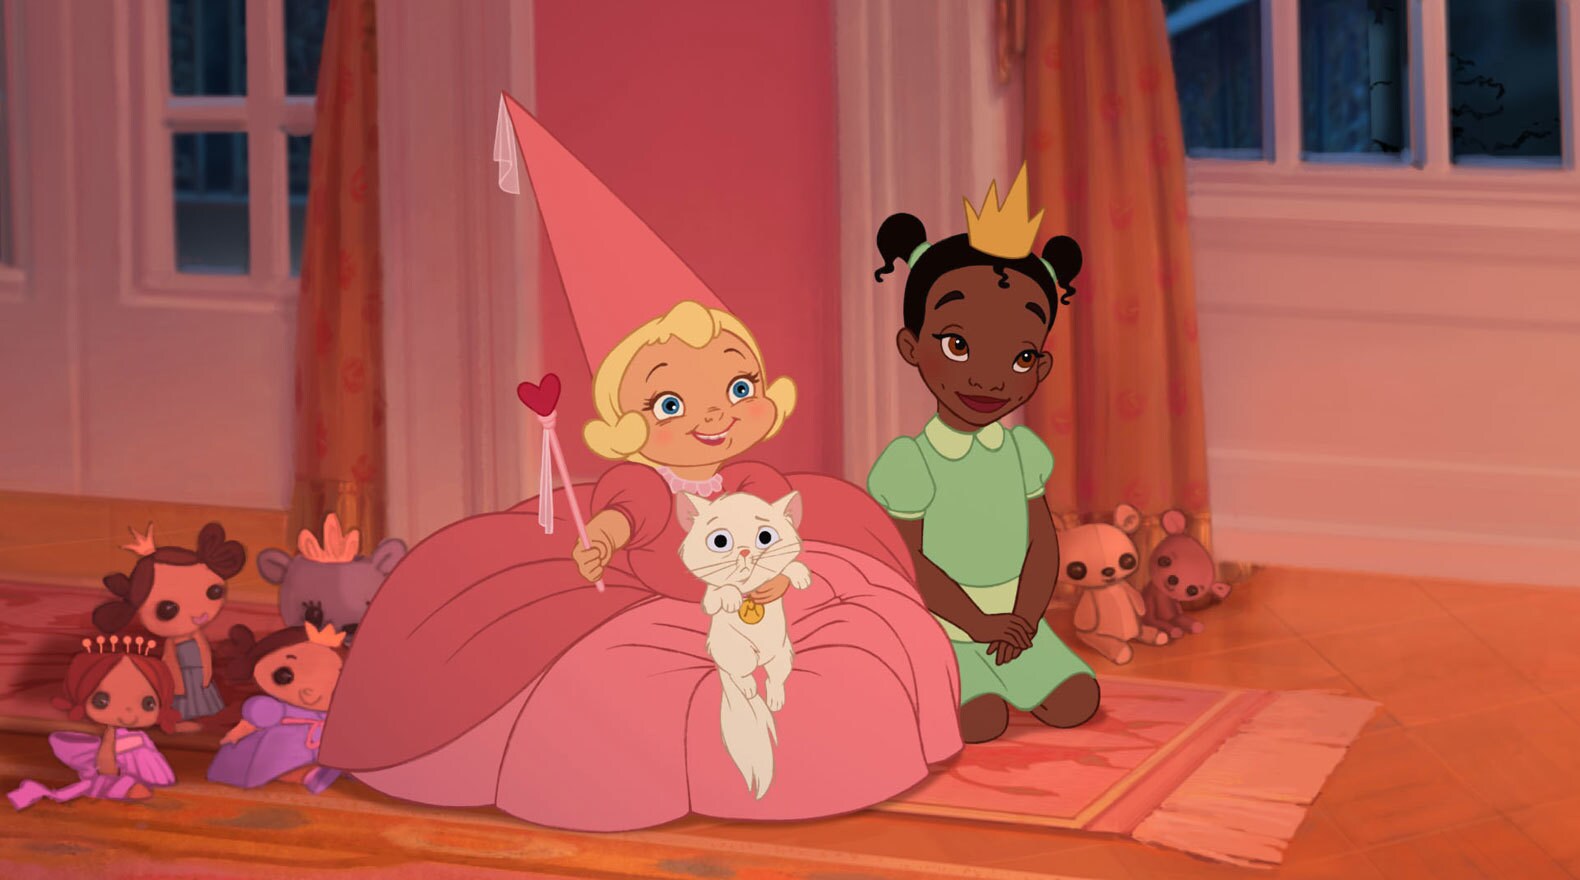 Young Charlotte and Tiana listening to a story